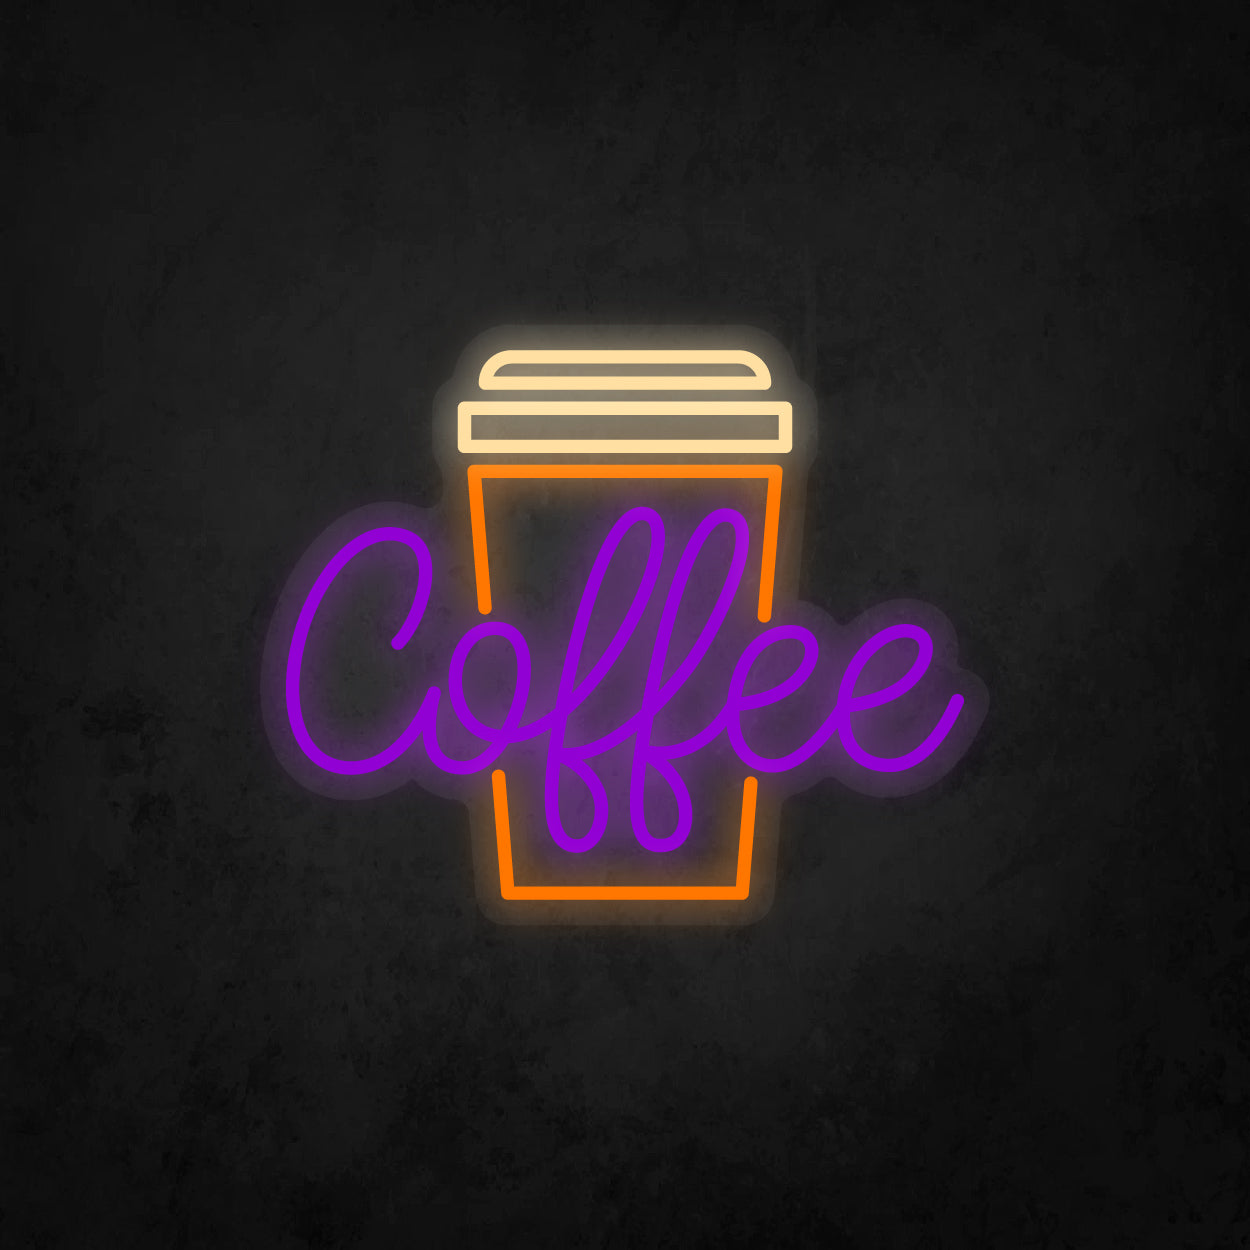 LED Neon Sign - Takeaway Coffee